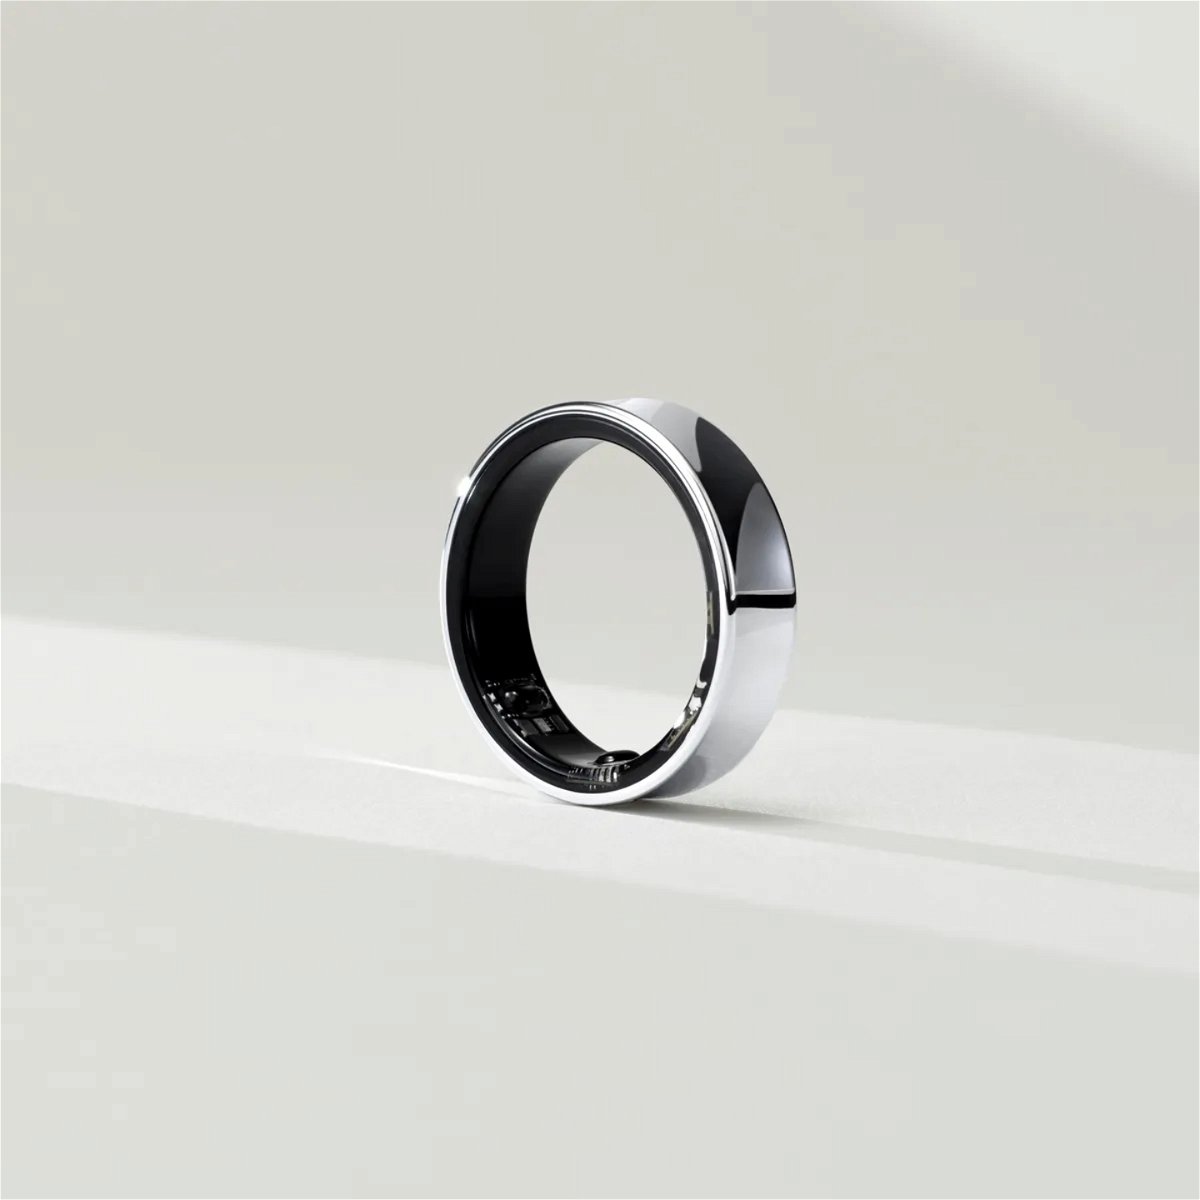 One of the few real images we have of the Samsung Galaxy Ring